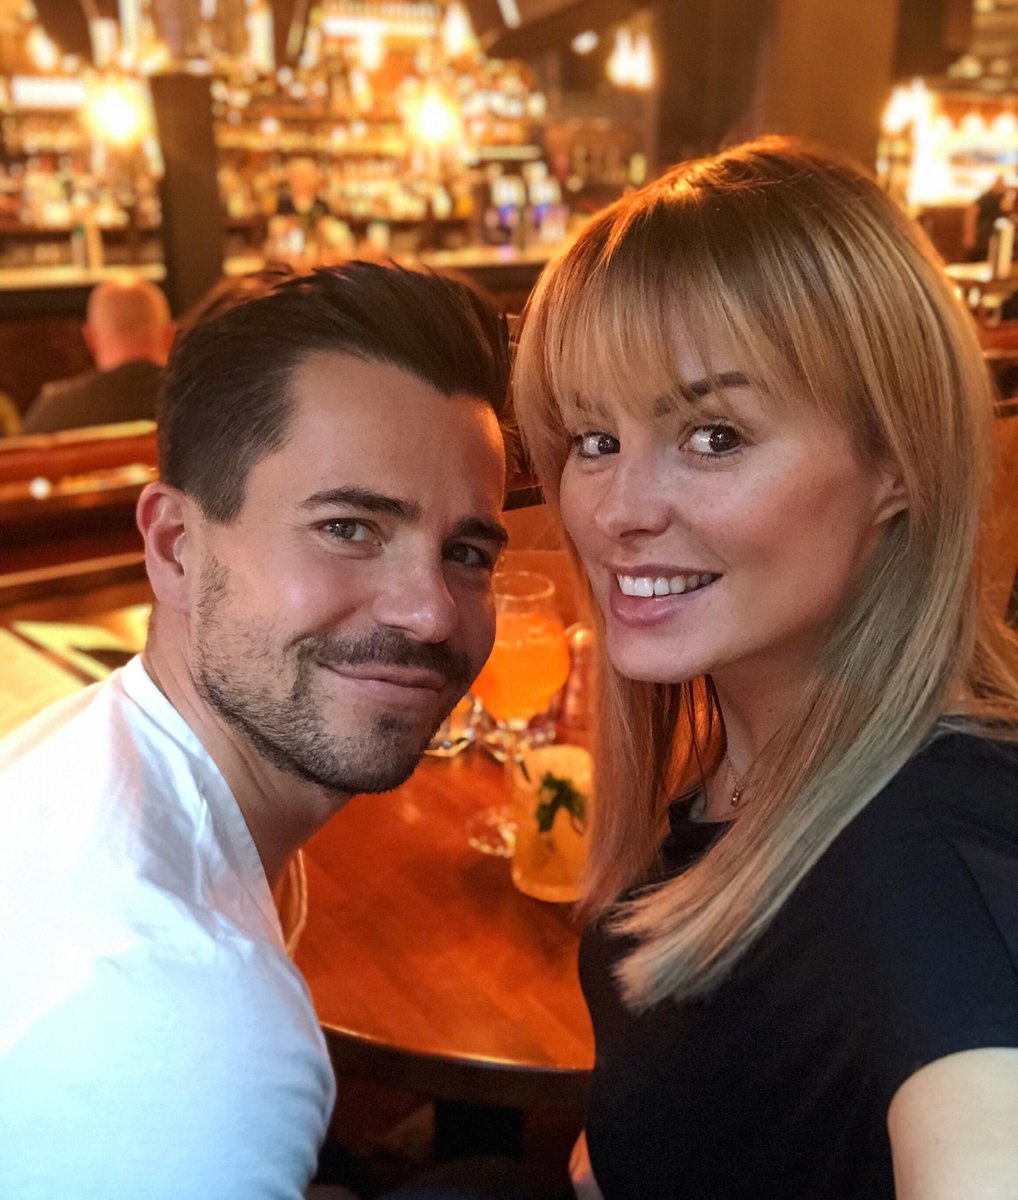 Cocktails @BanyanSpinMCR ???????? with this stud muffin @olivermellor ???? https://t.co/9QunLSqYca